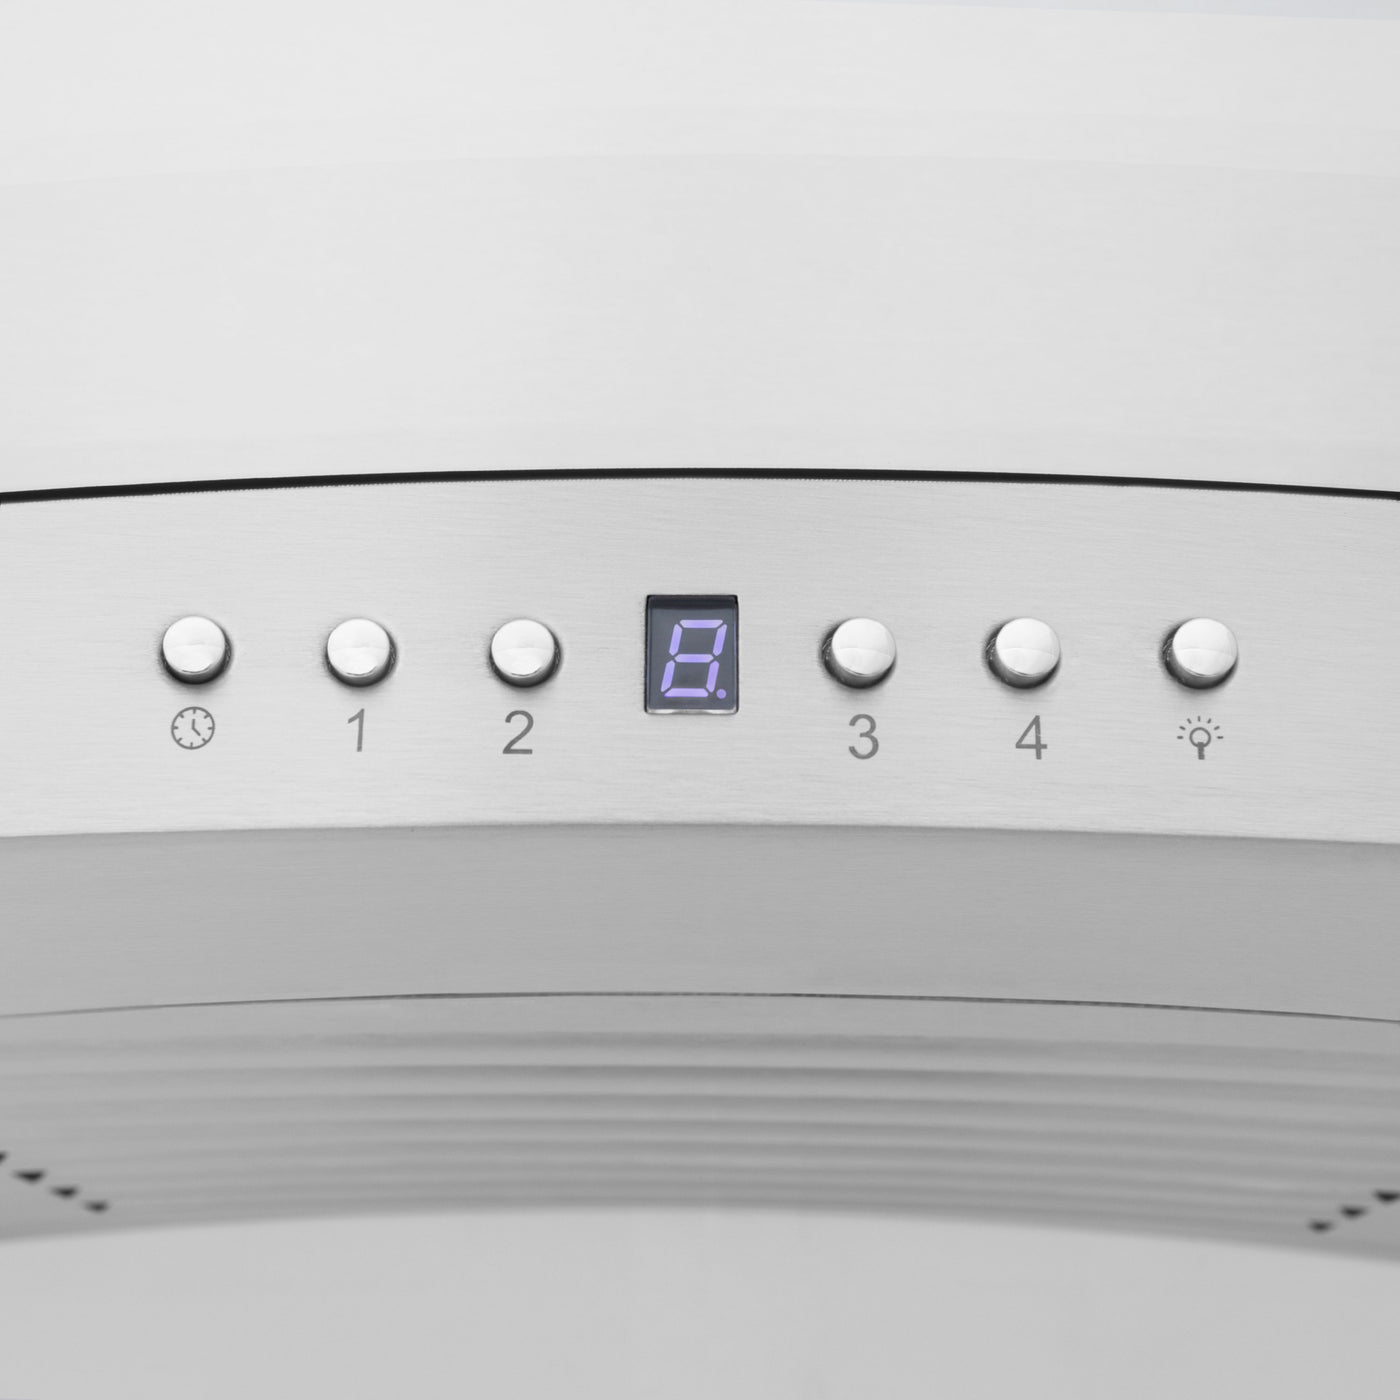 ZLINE Wall Mount Range Hood in Stainless Steel with Built-in CrownSound™ Bluetooth Speakers (KN4CRN-BT)